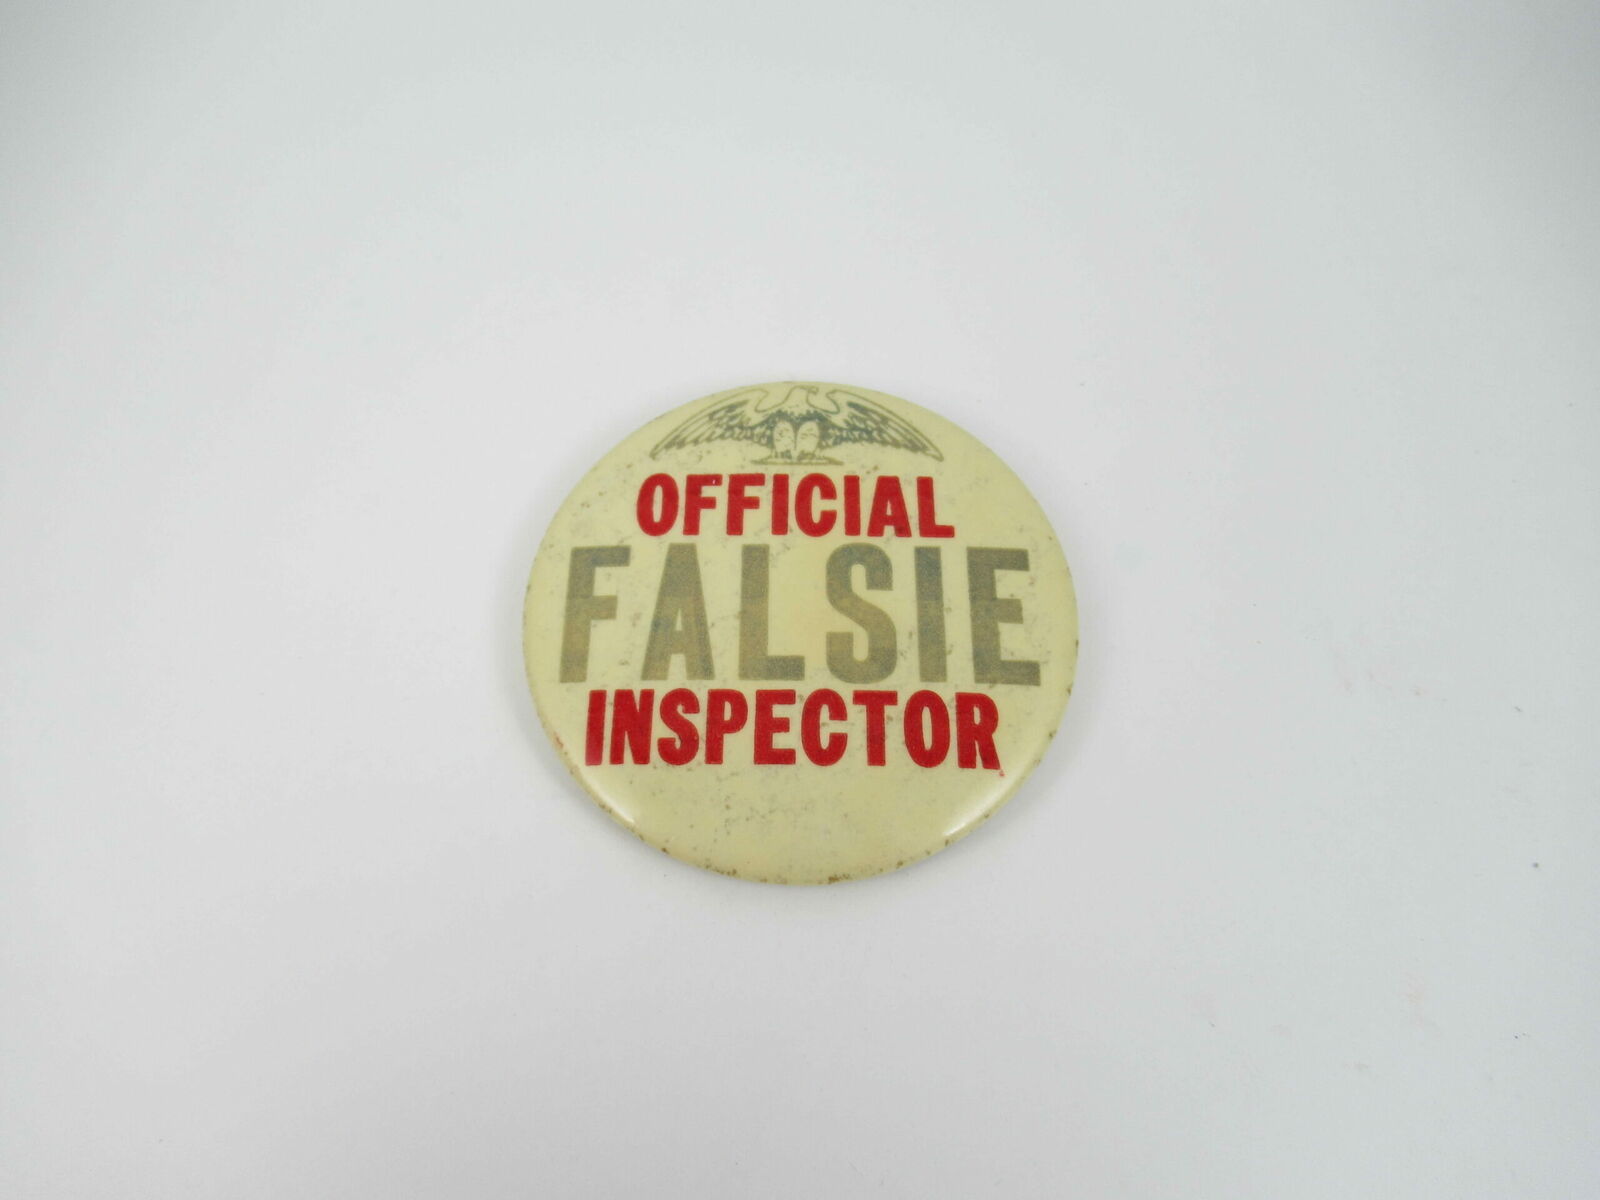 VINTAGE OFFICIAL FALSIE INSPECTOR 1960’S HUMOROUS PIN-BACK BUTTON GOOD USED 